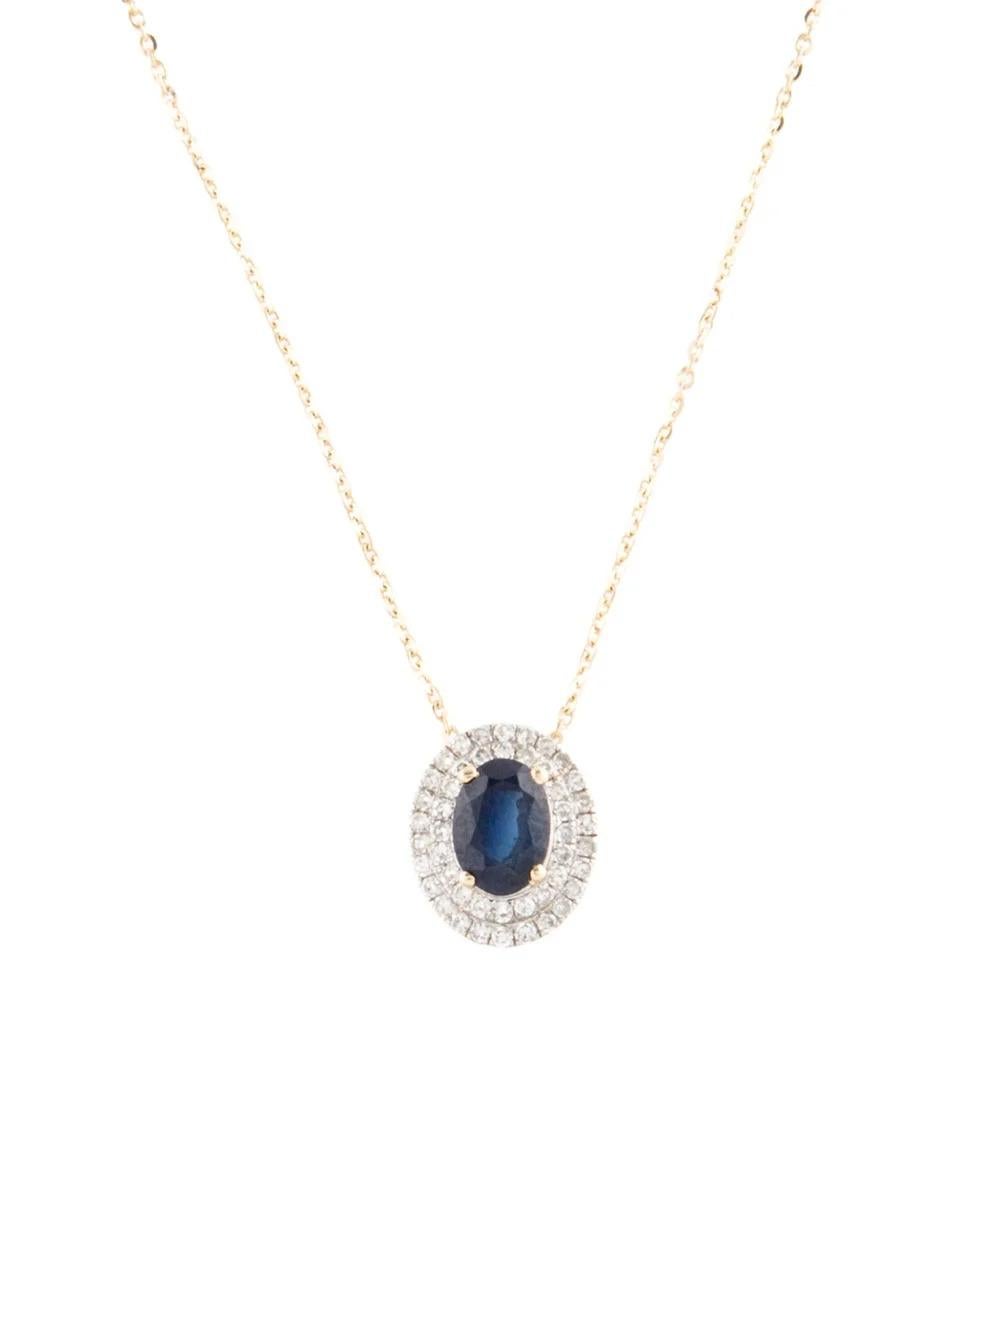 Experience timeless elegance with this stunning 14K Yellow Gold Pendant Necklace featuring a captivating 0.86 Carat Oval Brilliant Sapphire as its centerpiece. Crafted with meticulous attention to detail, this exquisite piece exudes sophistication